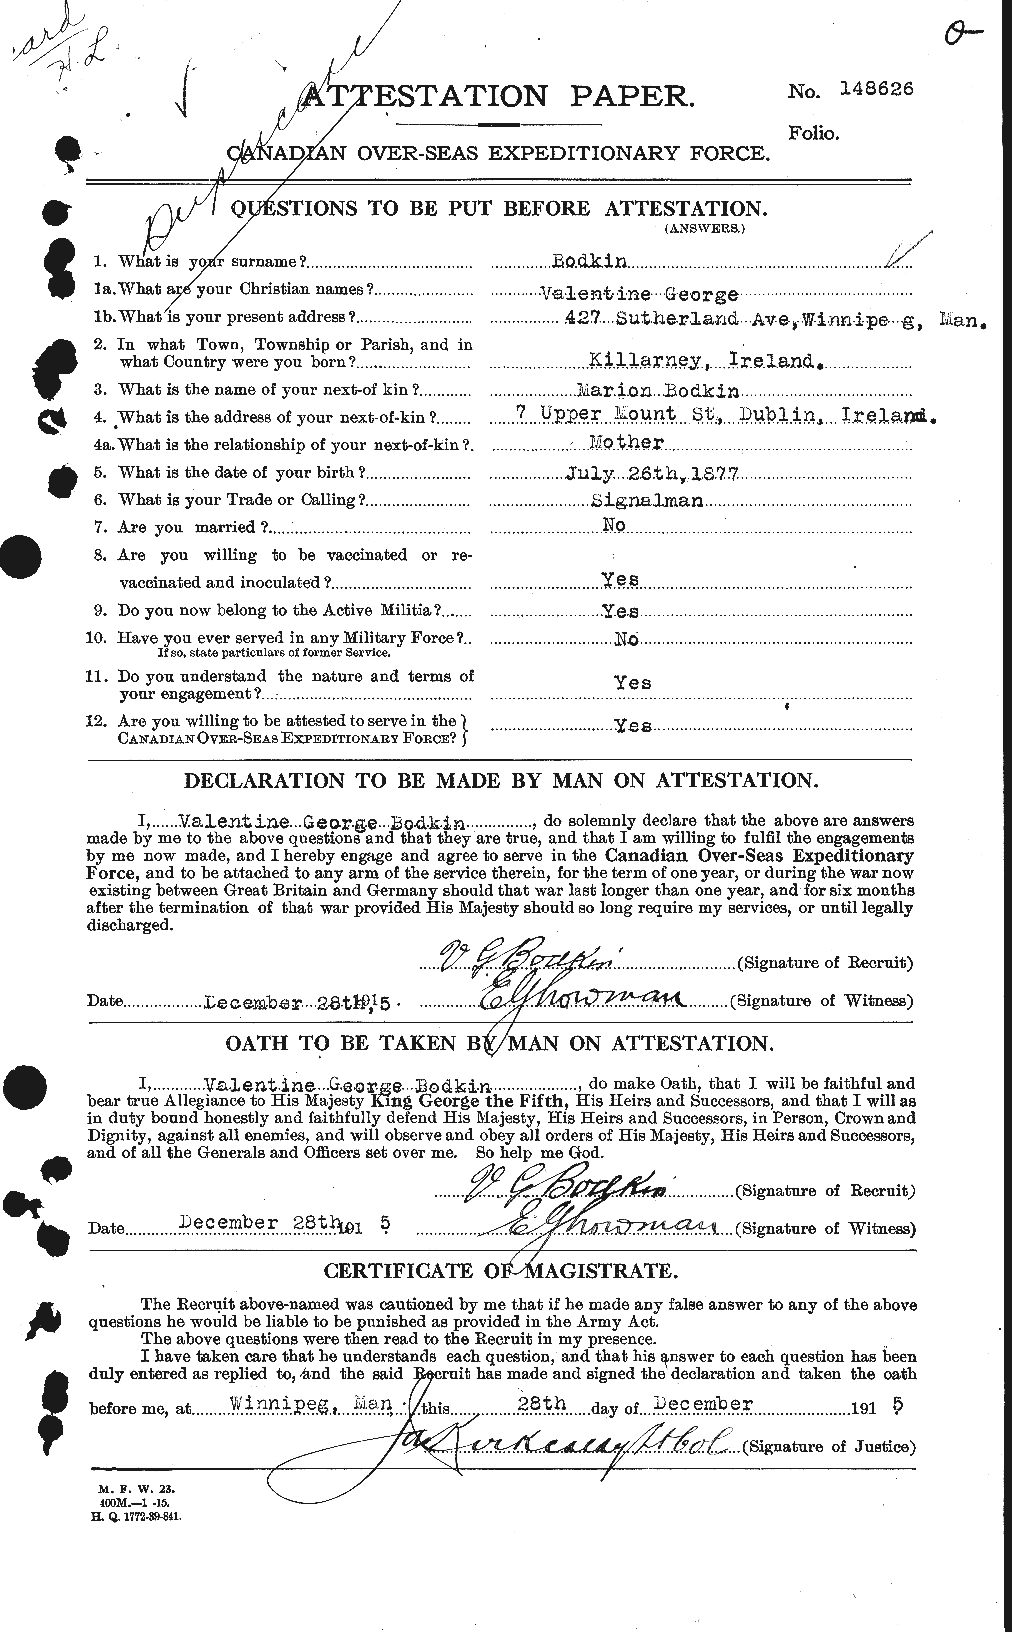 Personnel Records of the First World War - CEF 245156a